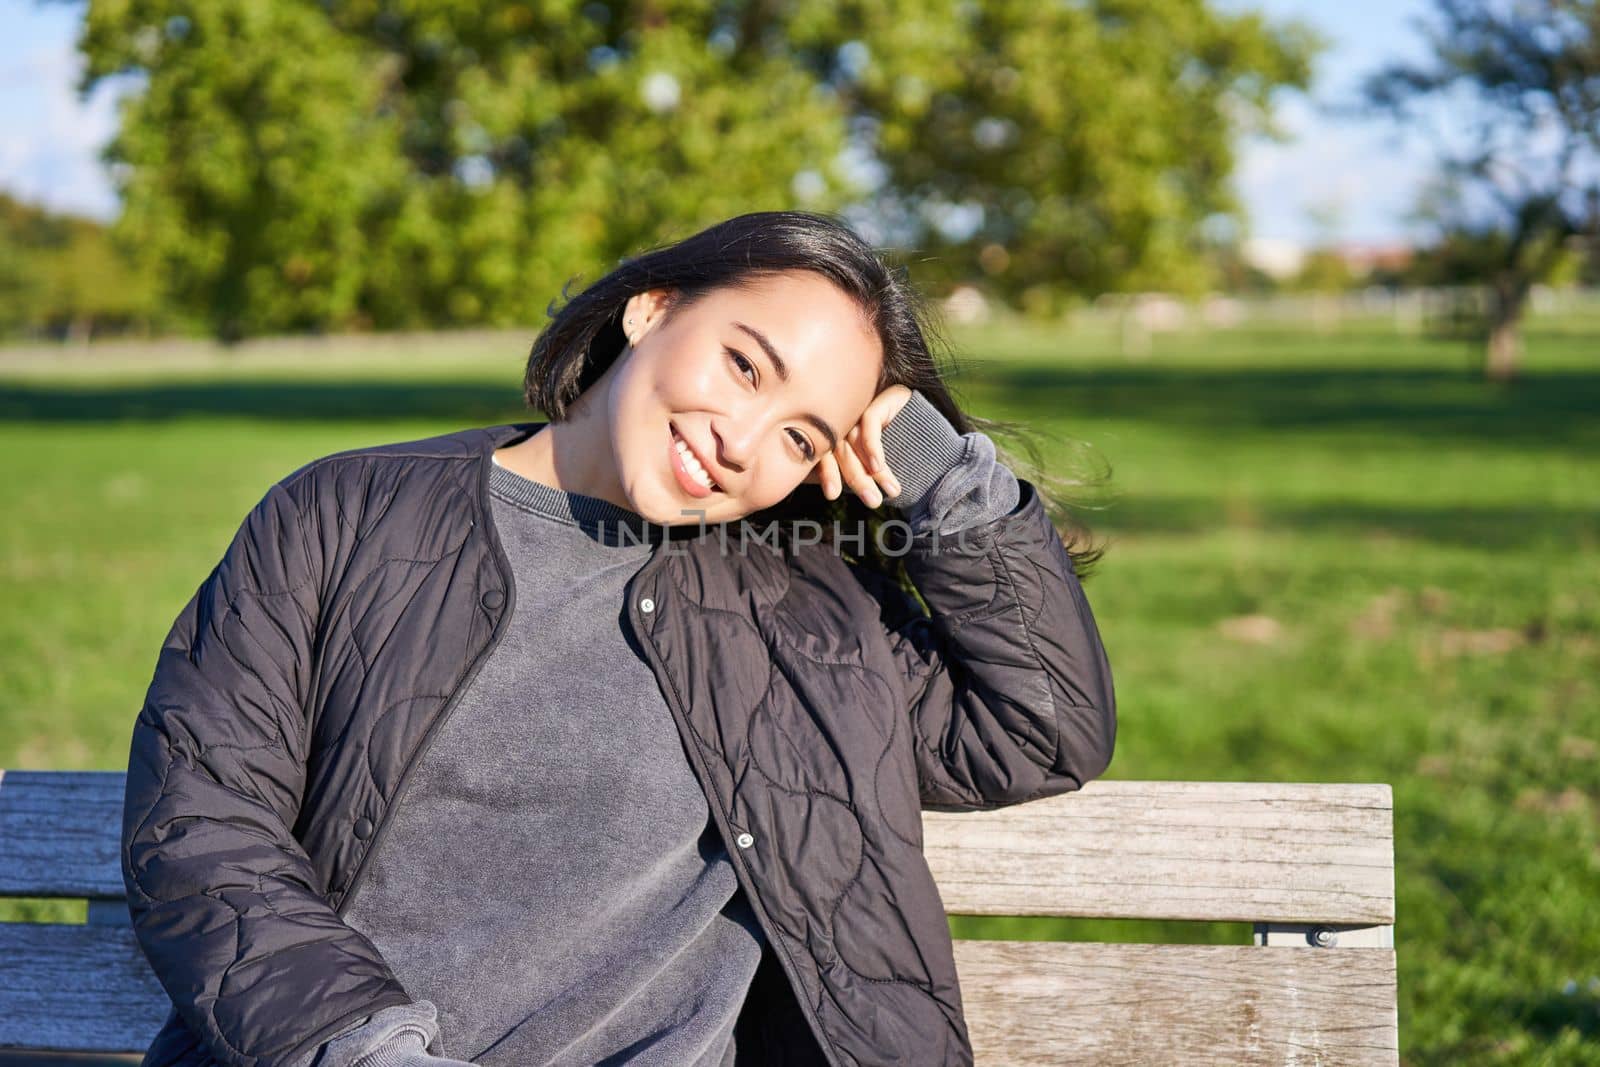 Beauty portrait of smiling asian girl with dark short hair, sitting on bench in park and gazing at camera.